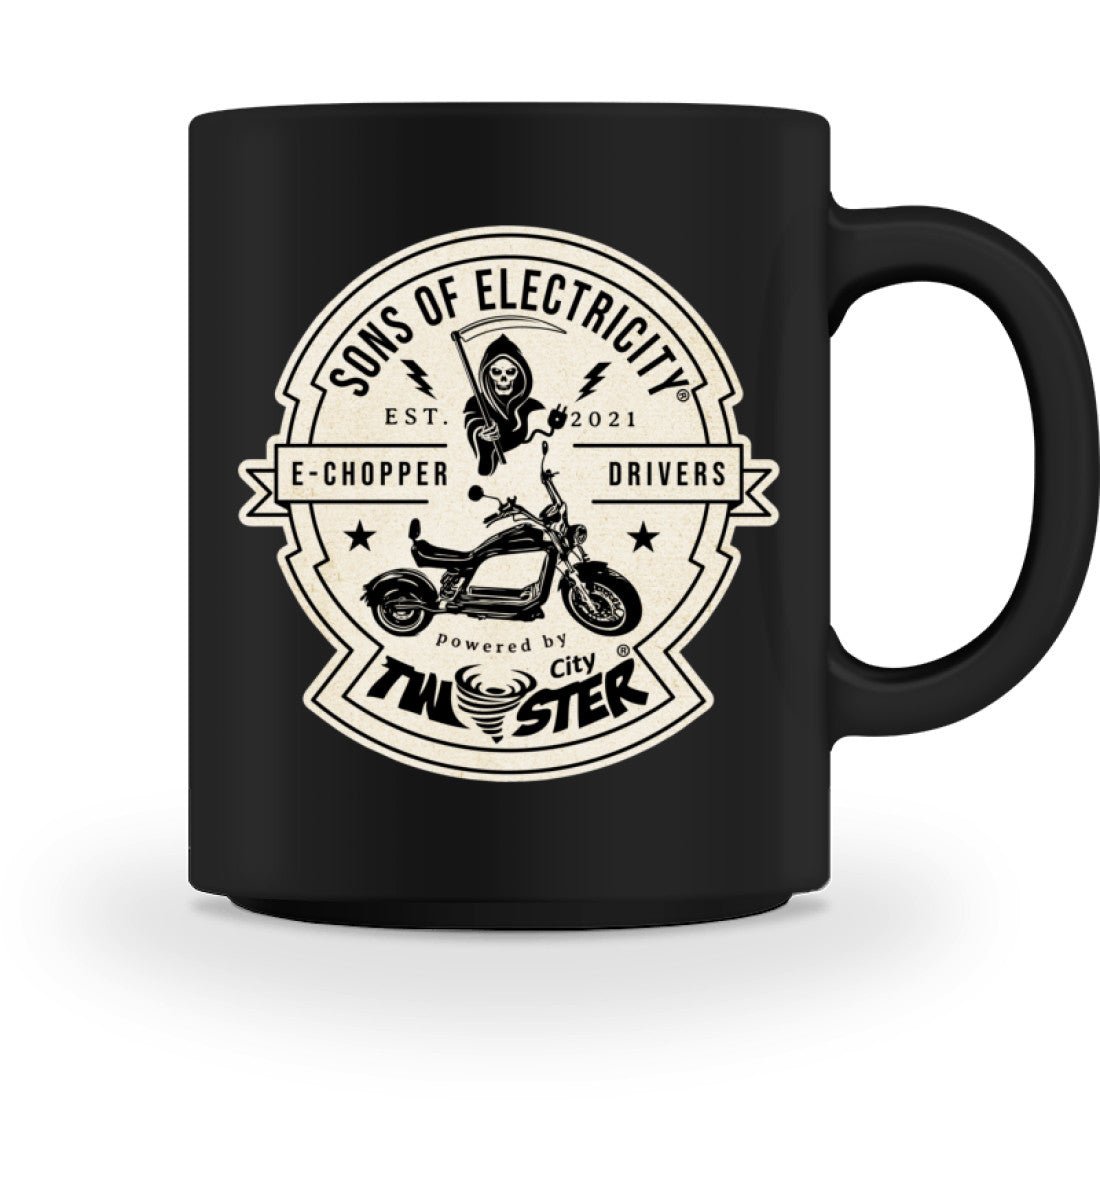 E-Chopper Tasse: SONS OF ELECTRICITY- Drivers - CityTwister